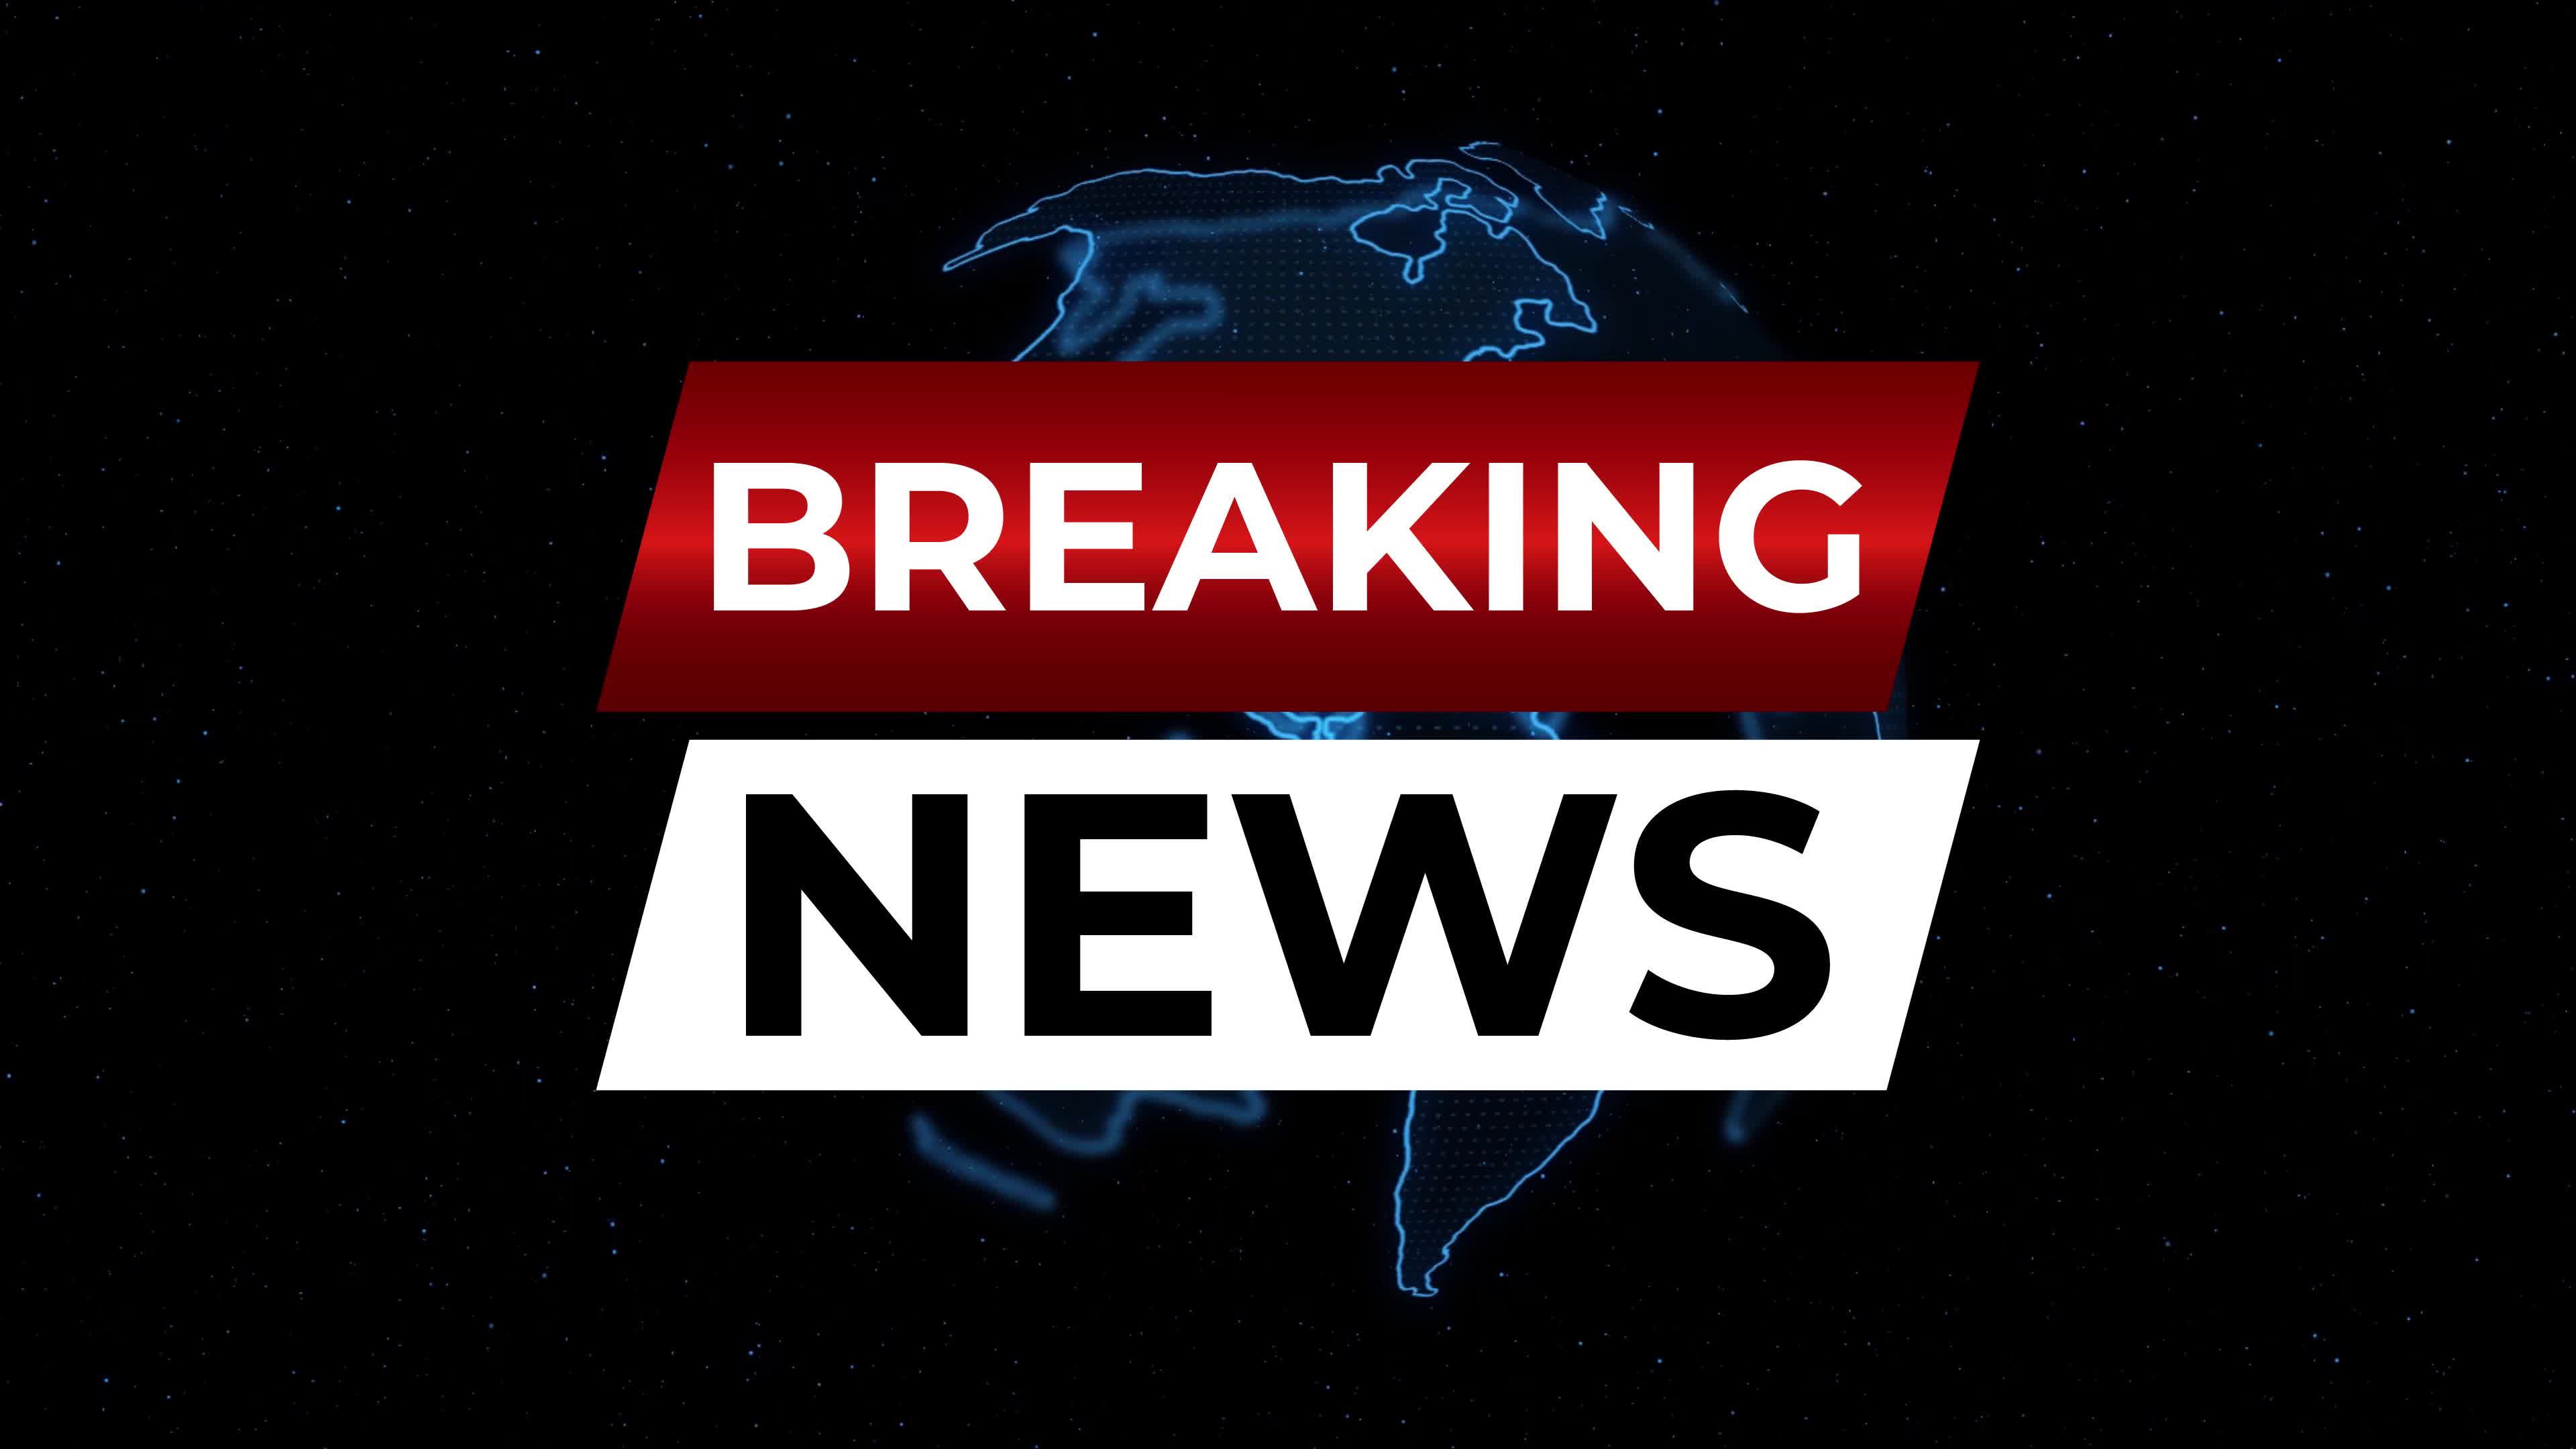 Breaking News Animation Stock Video Footage for Free Download